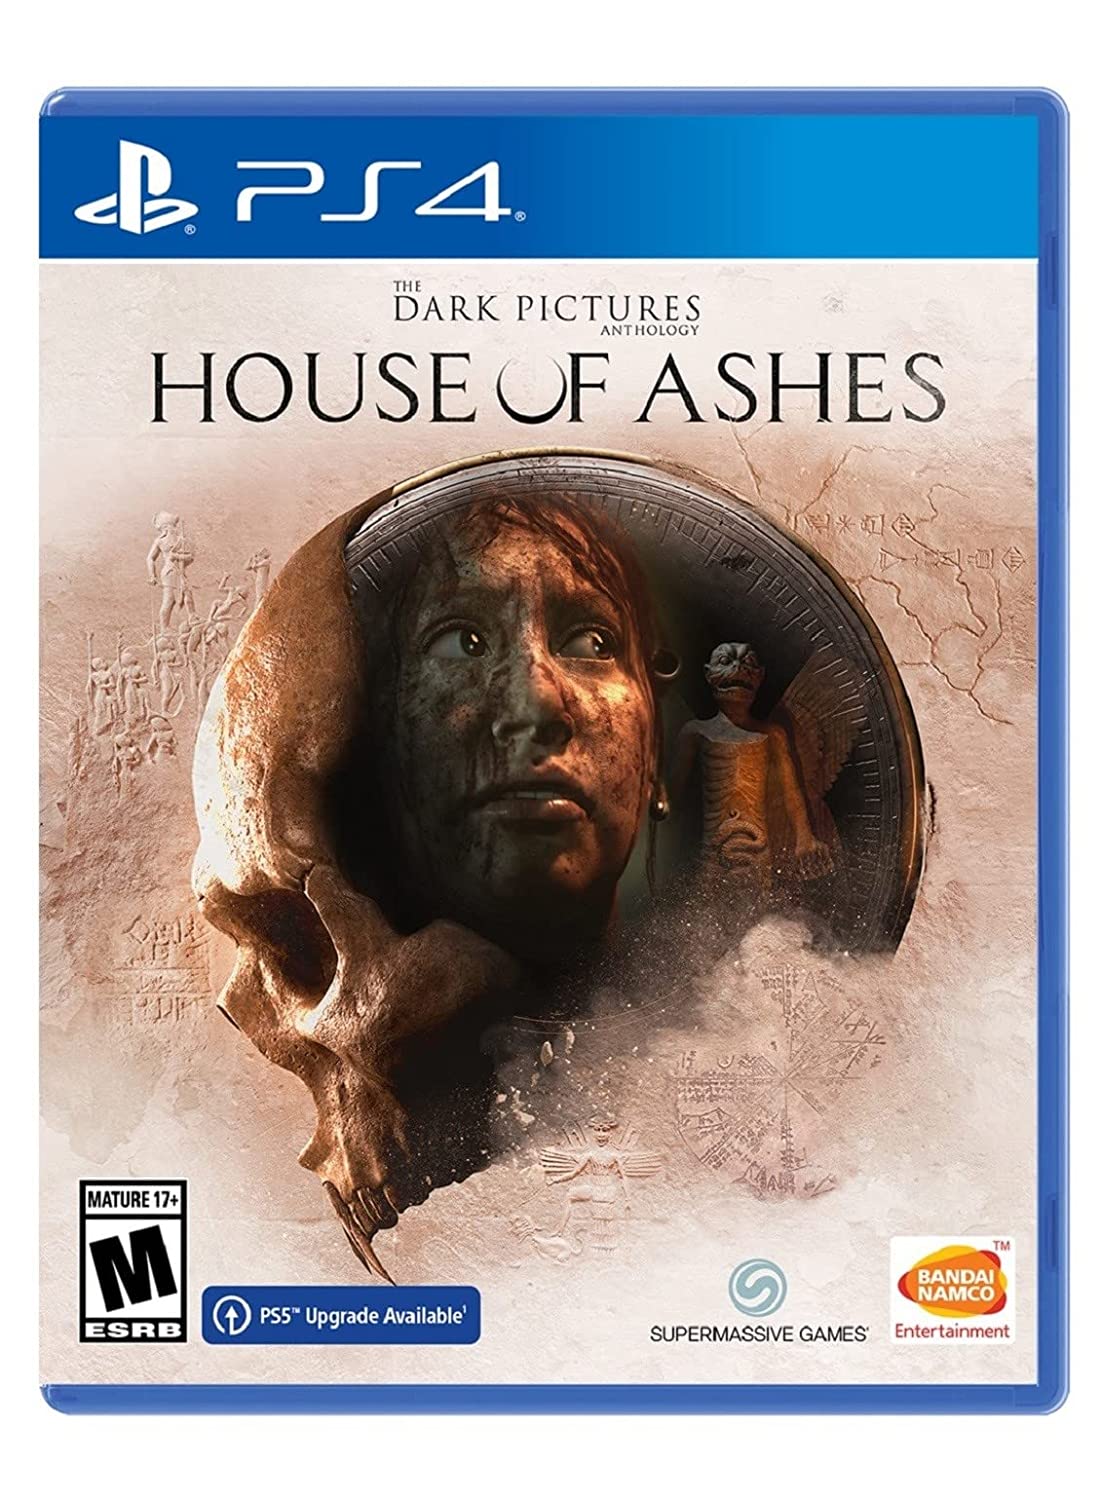 The Dark Pictures: House of Ashes - PlayStation 4 $15